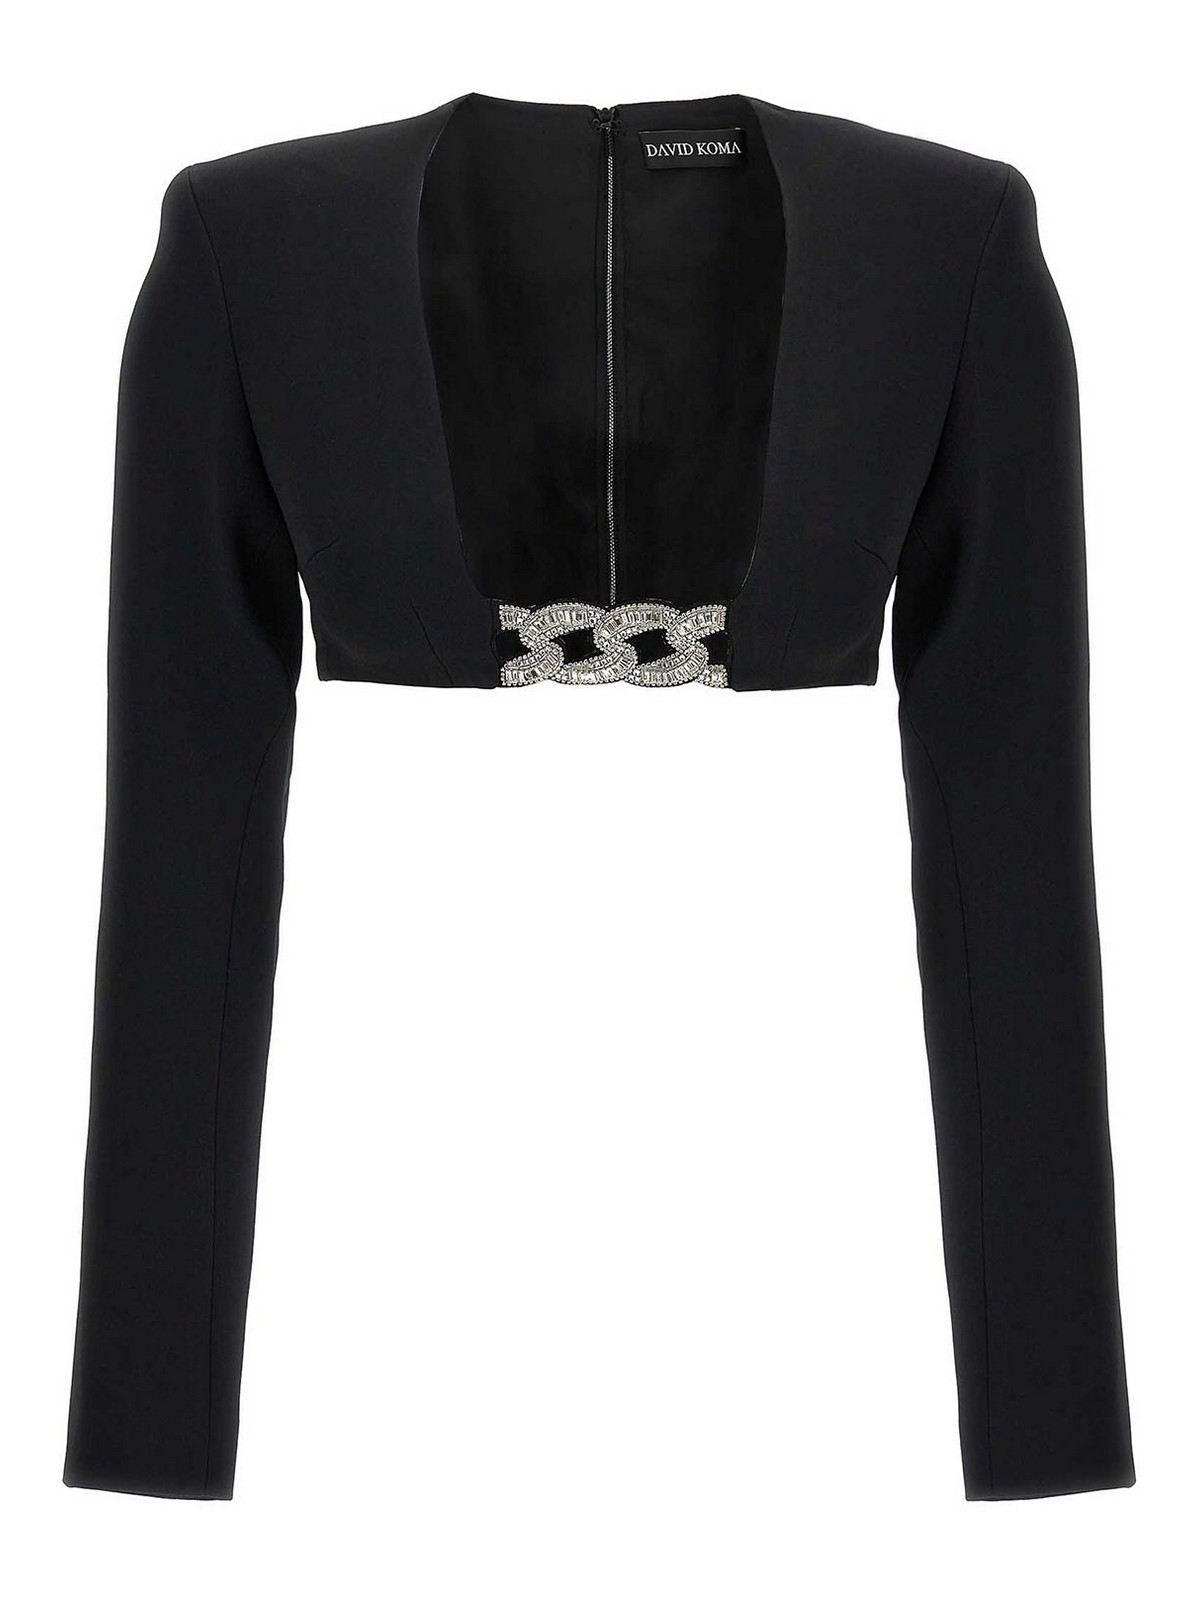 David Koma Top 3d Crystsal Chain And Square Neck In Negro